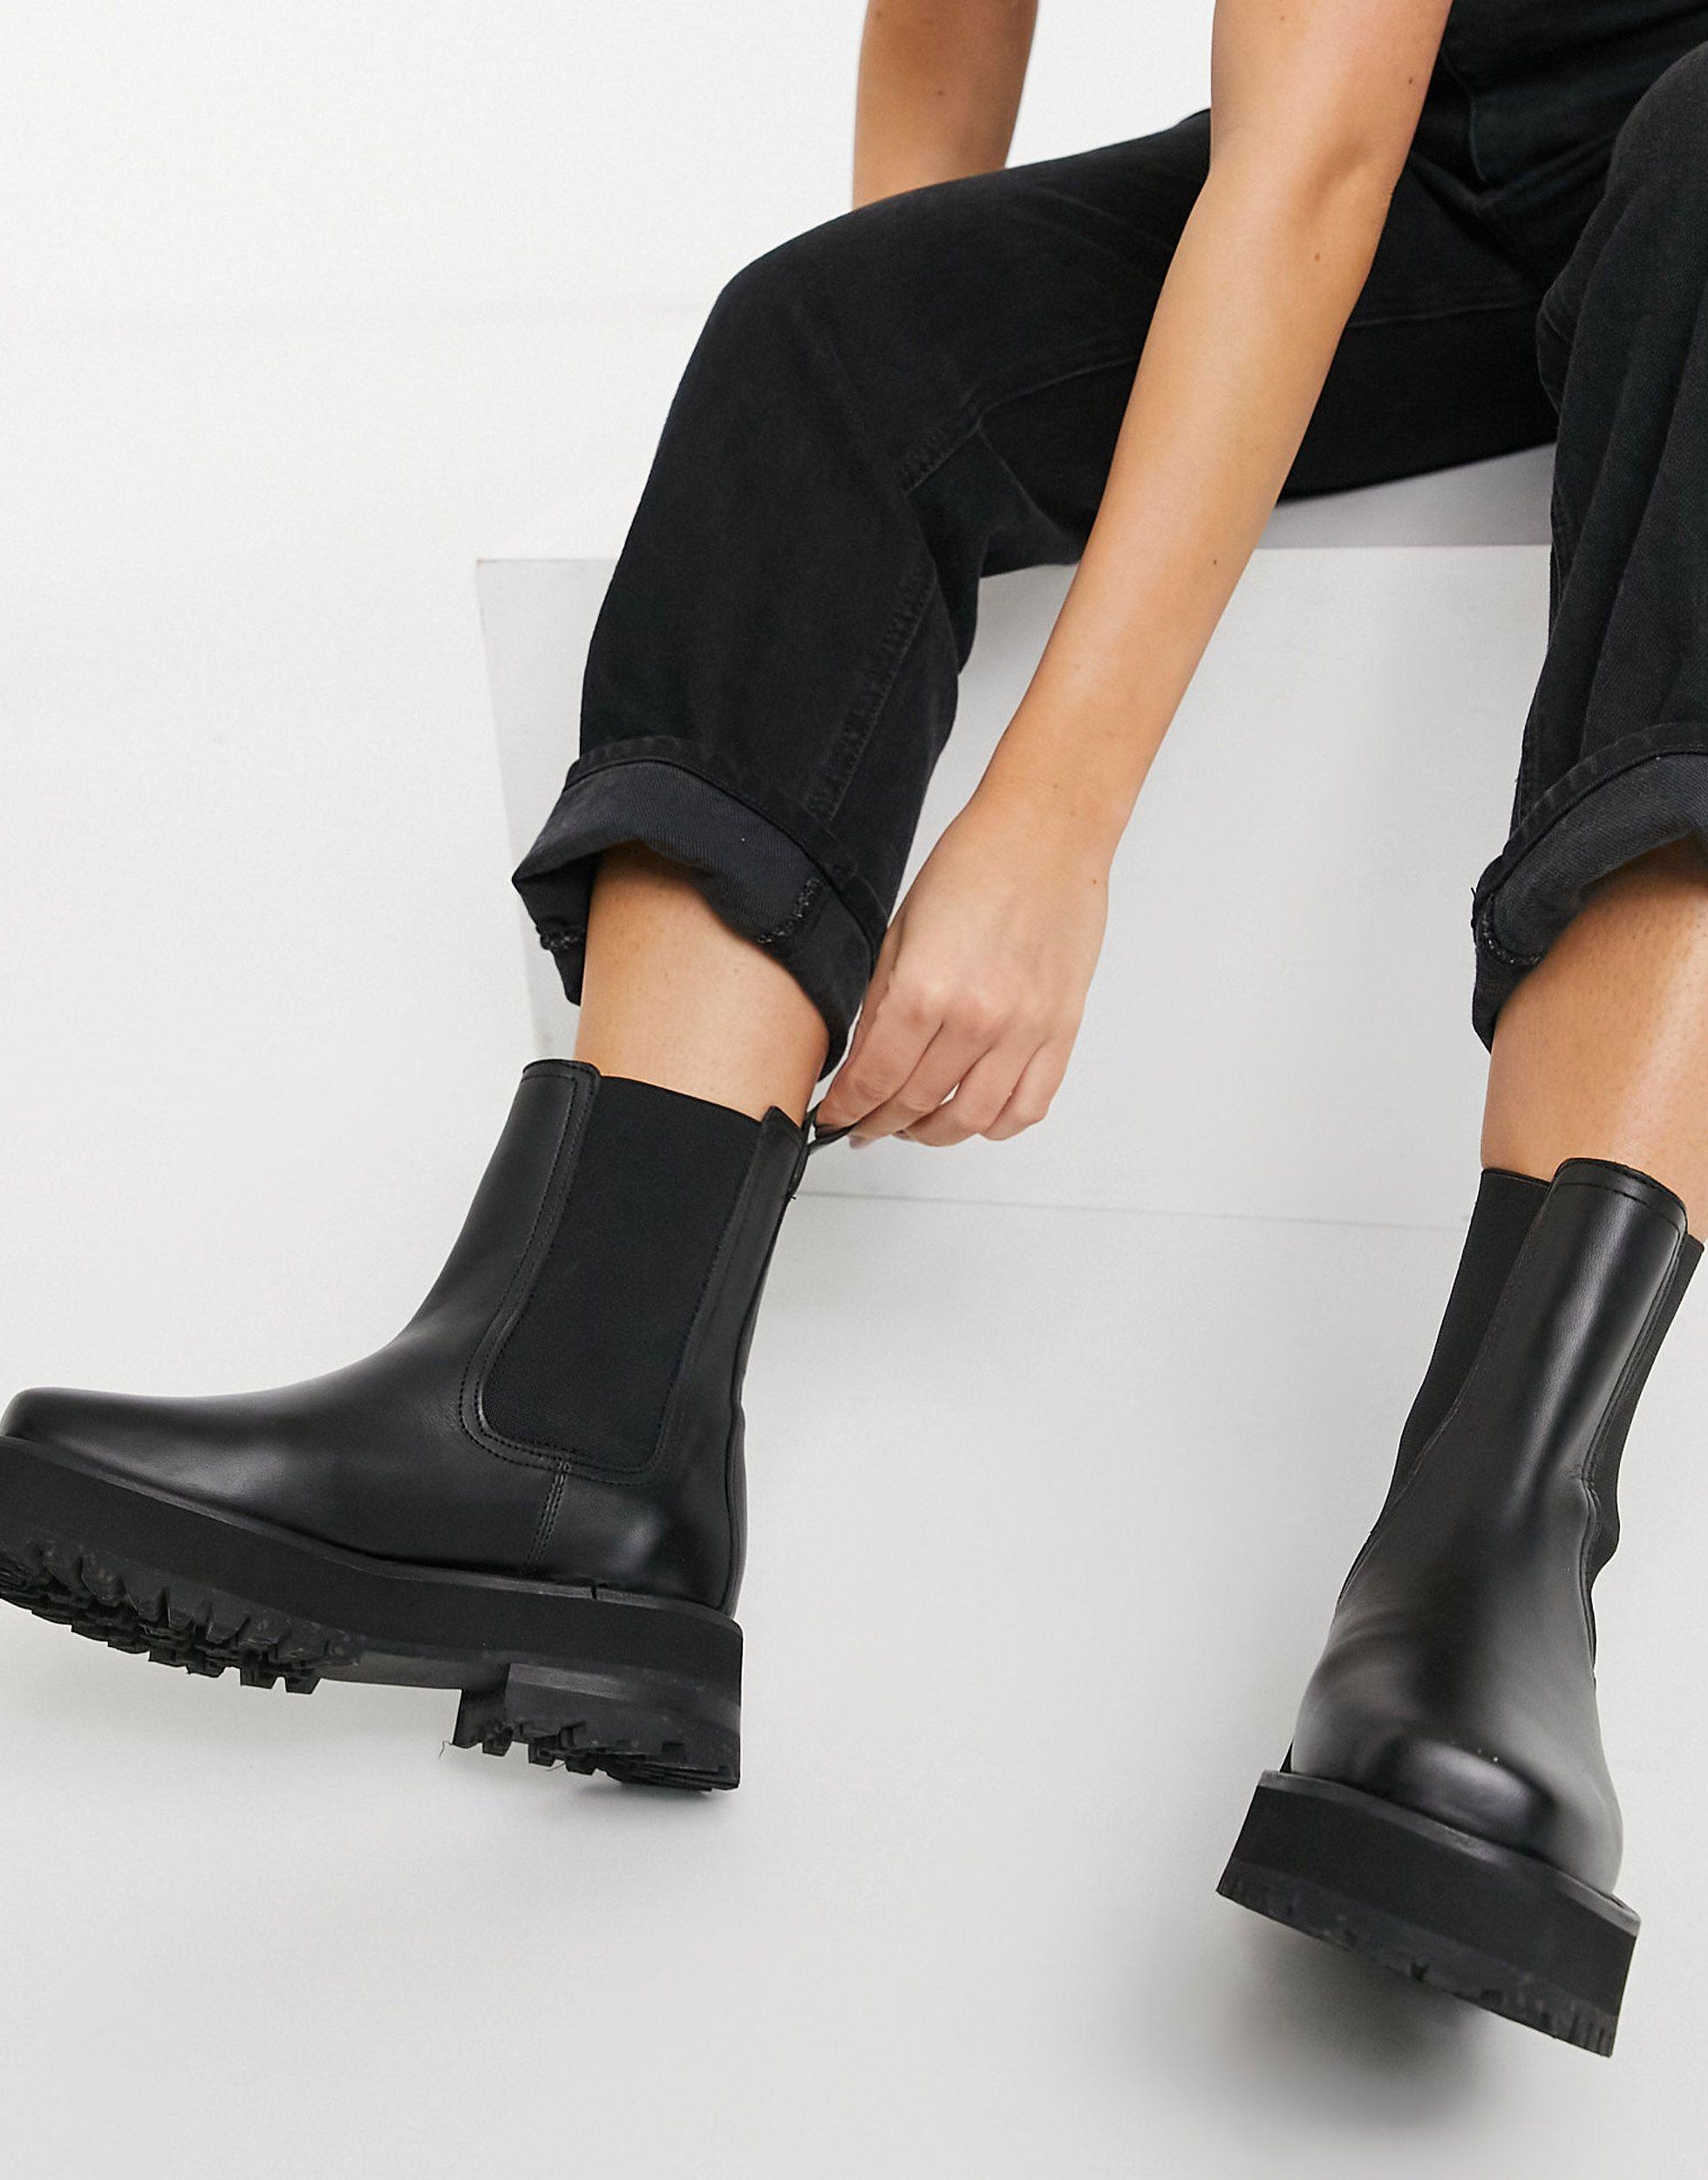 & Other Stories Leather Chunky Square Toe Boots in Black | Lyst Canada